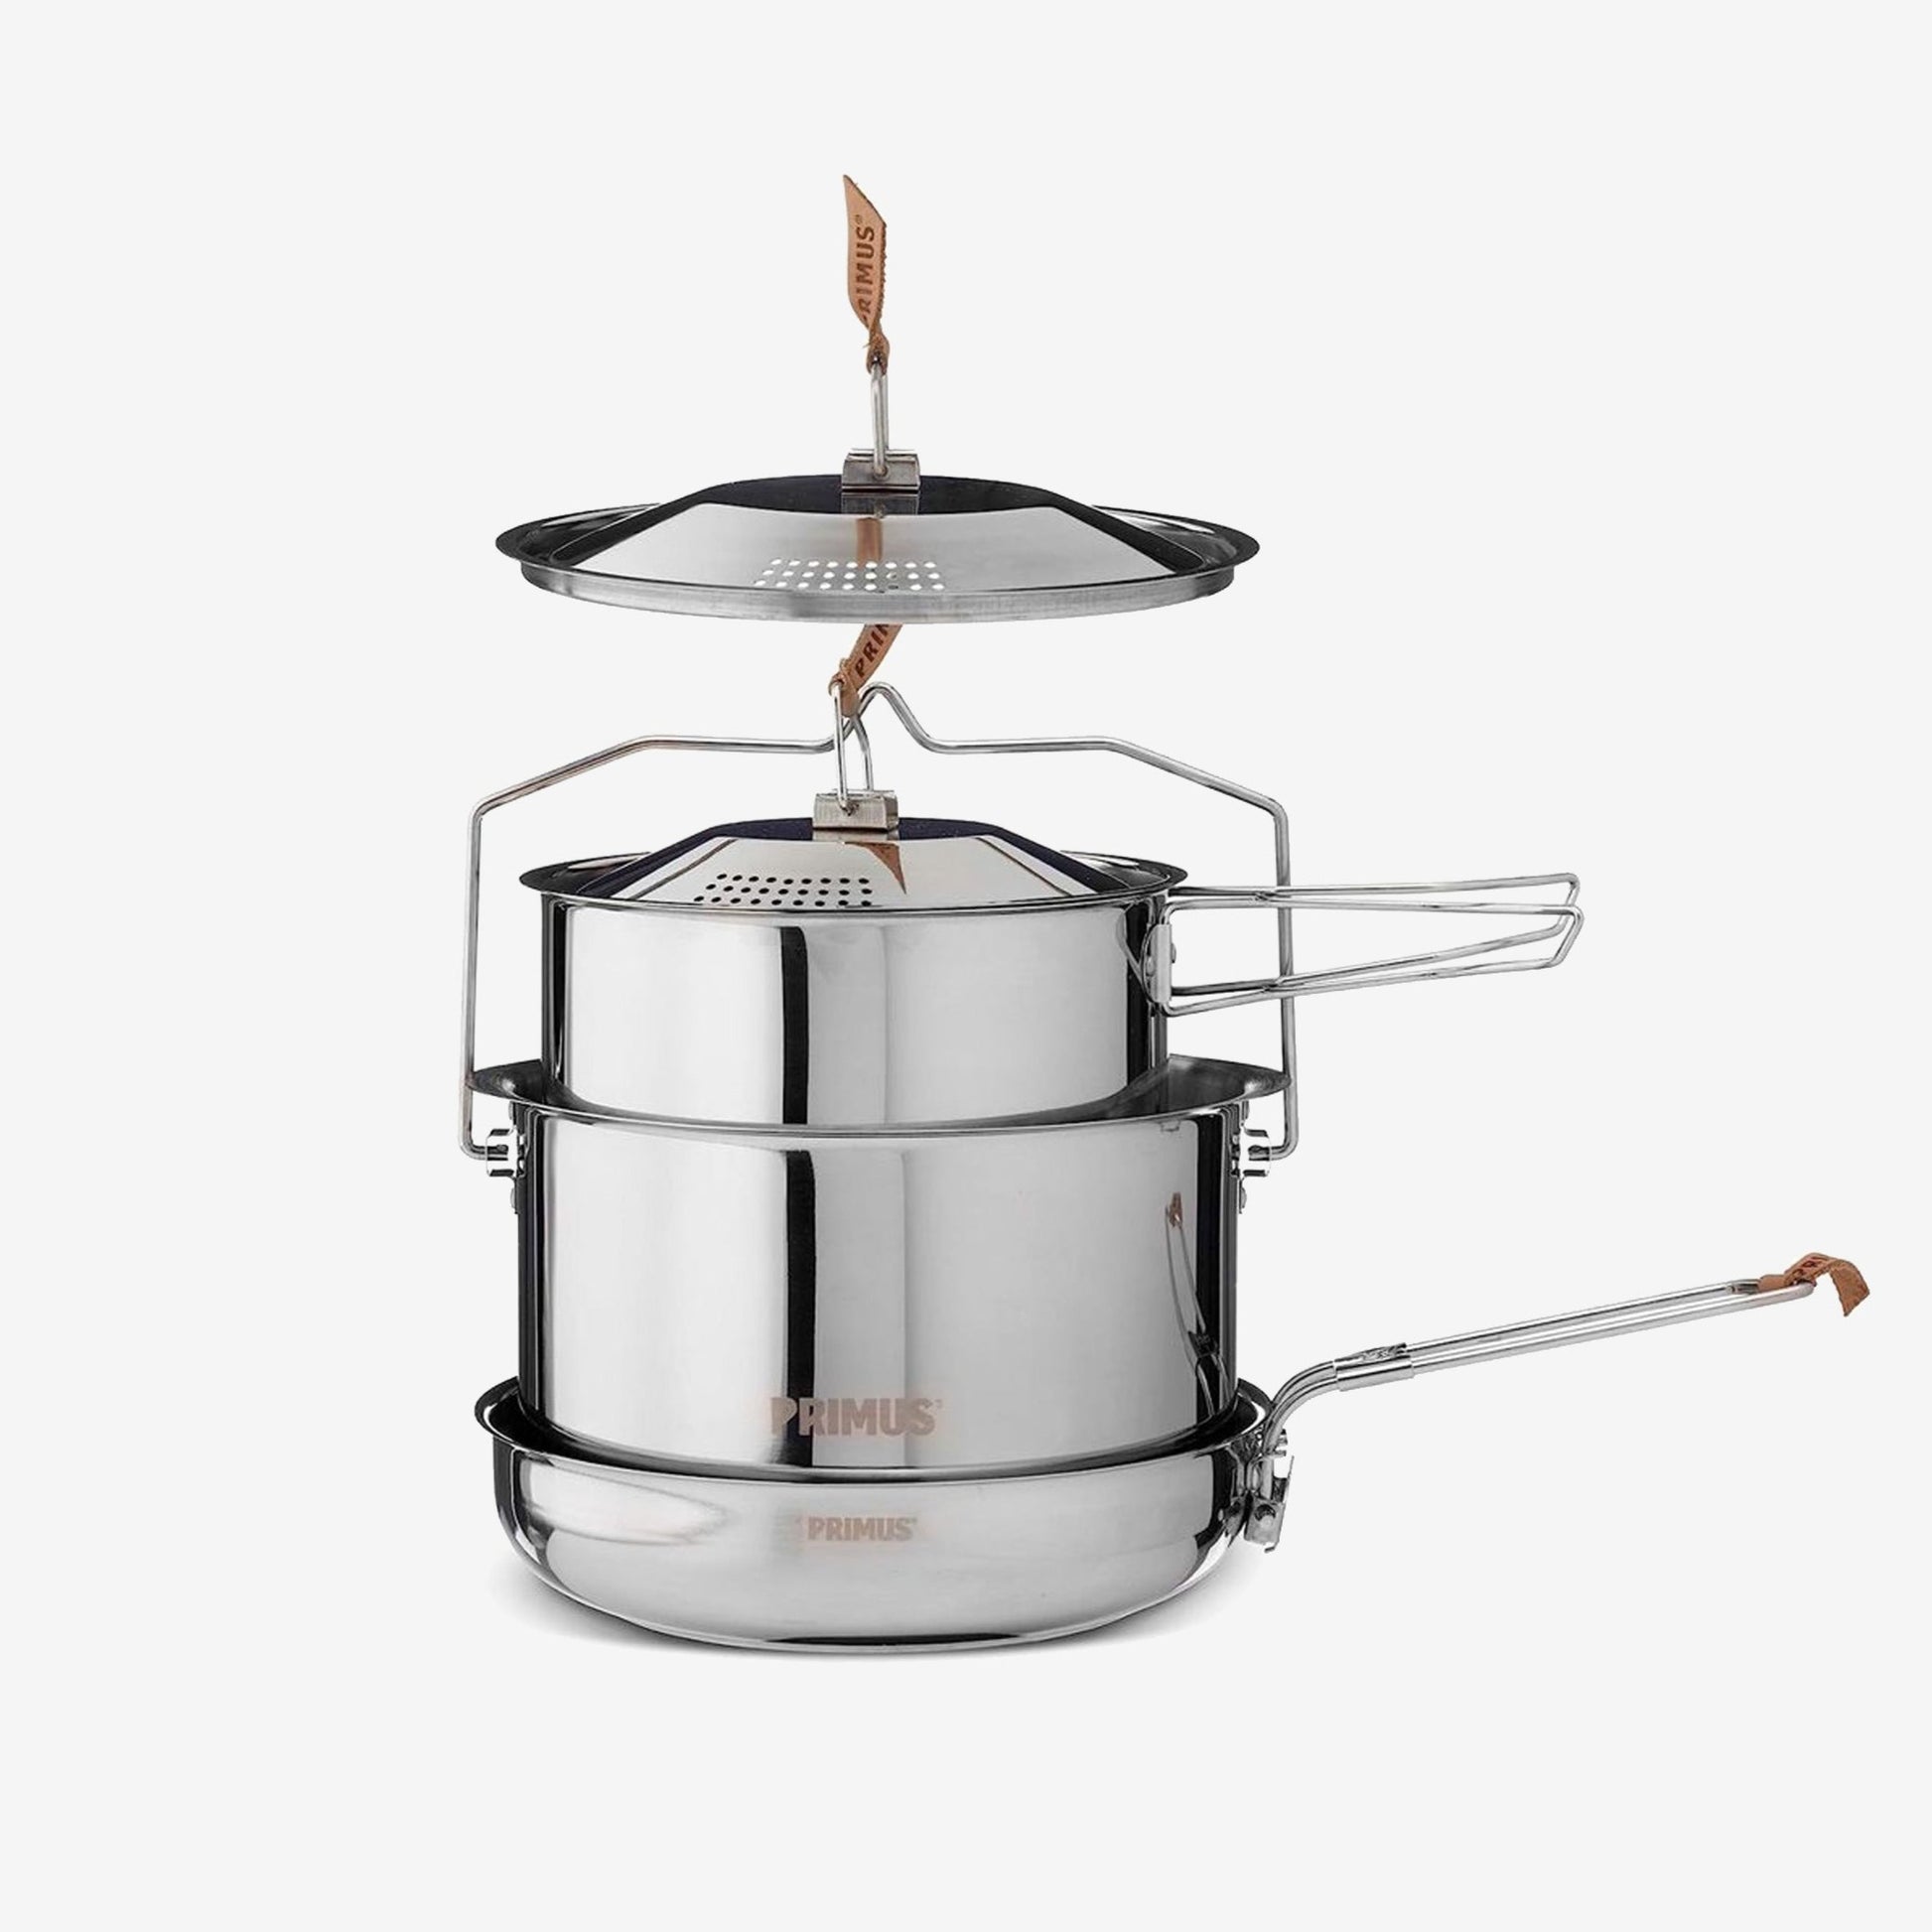 Primus Campfire Cookset S/S Large